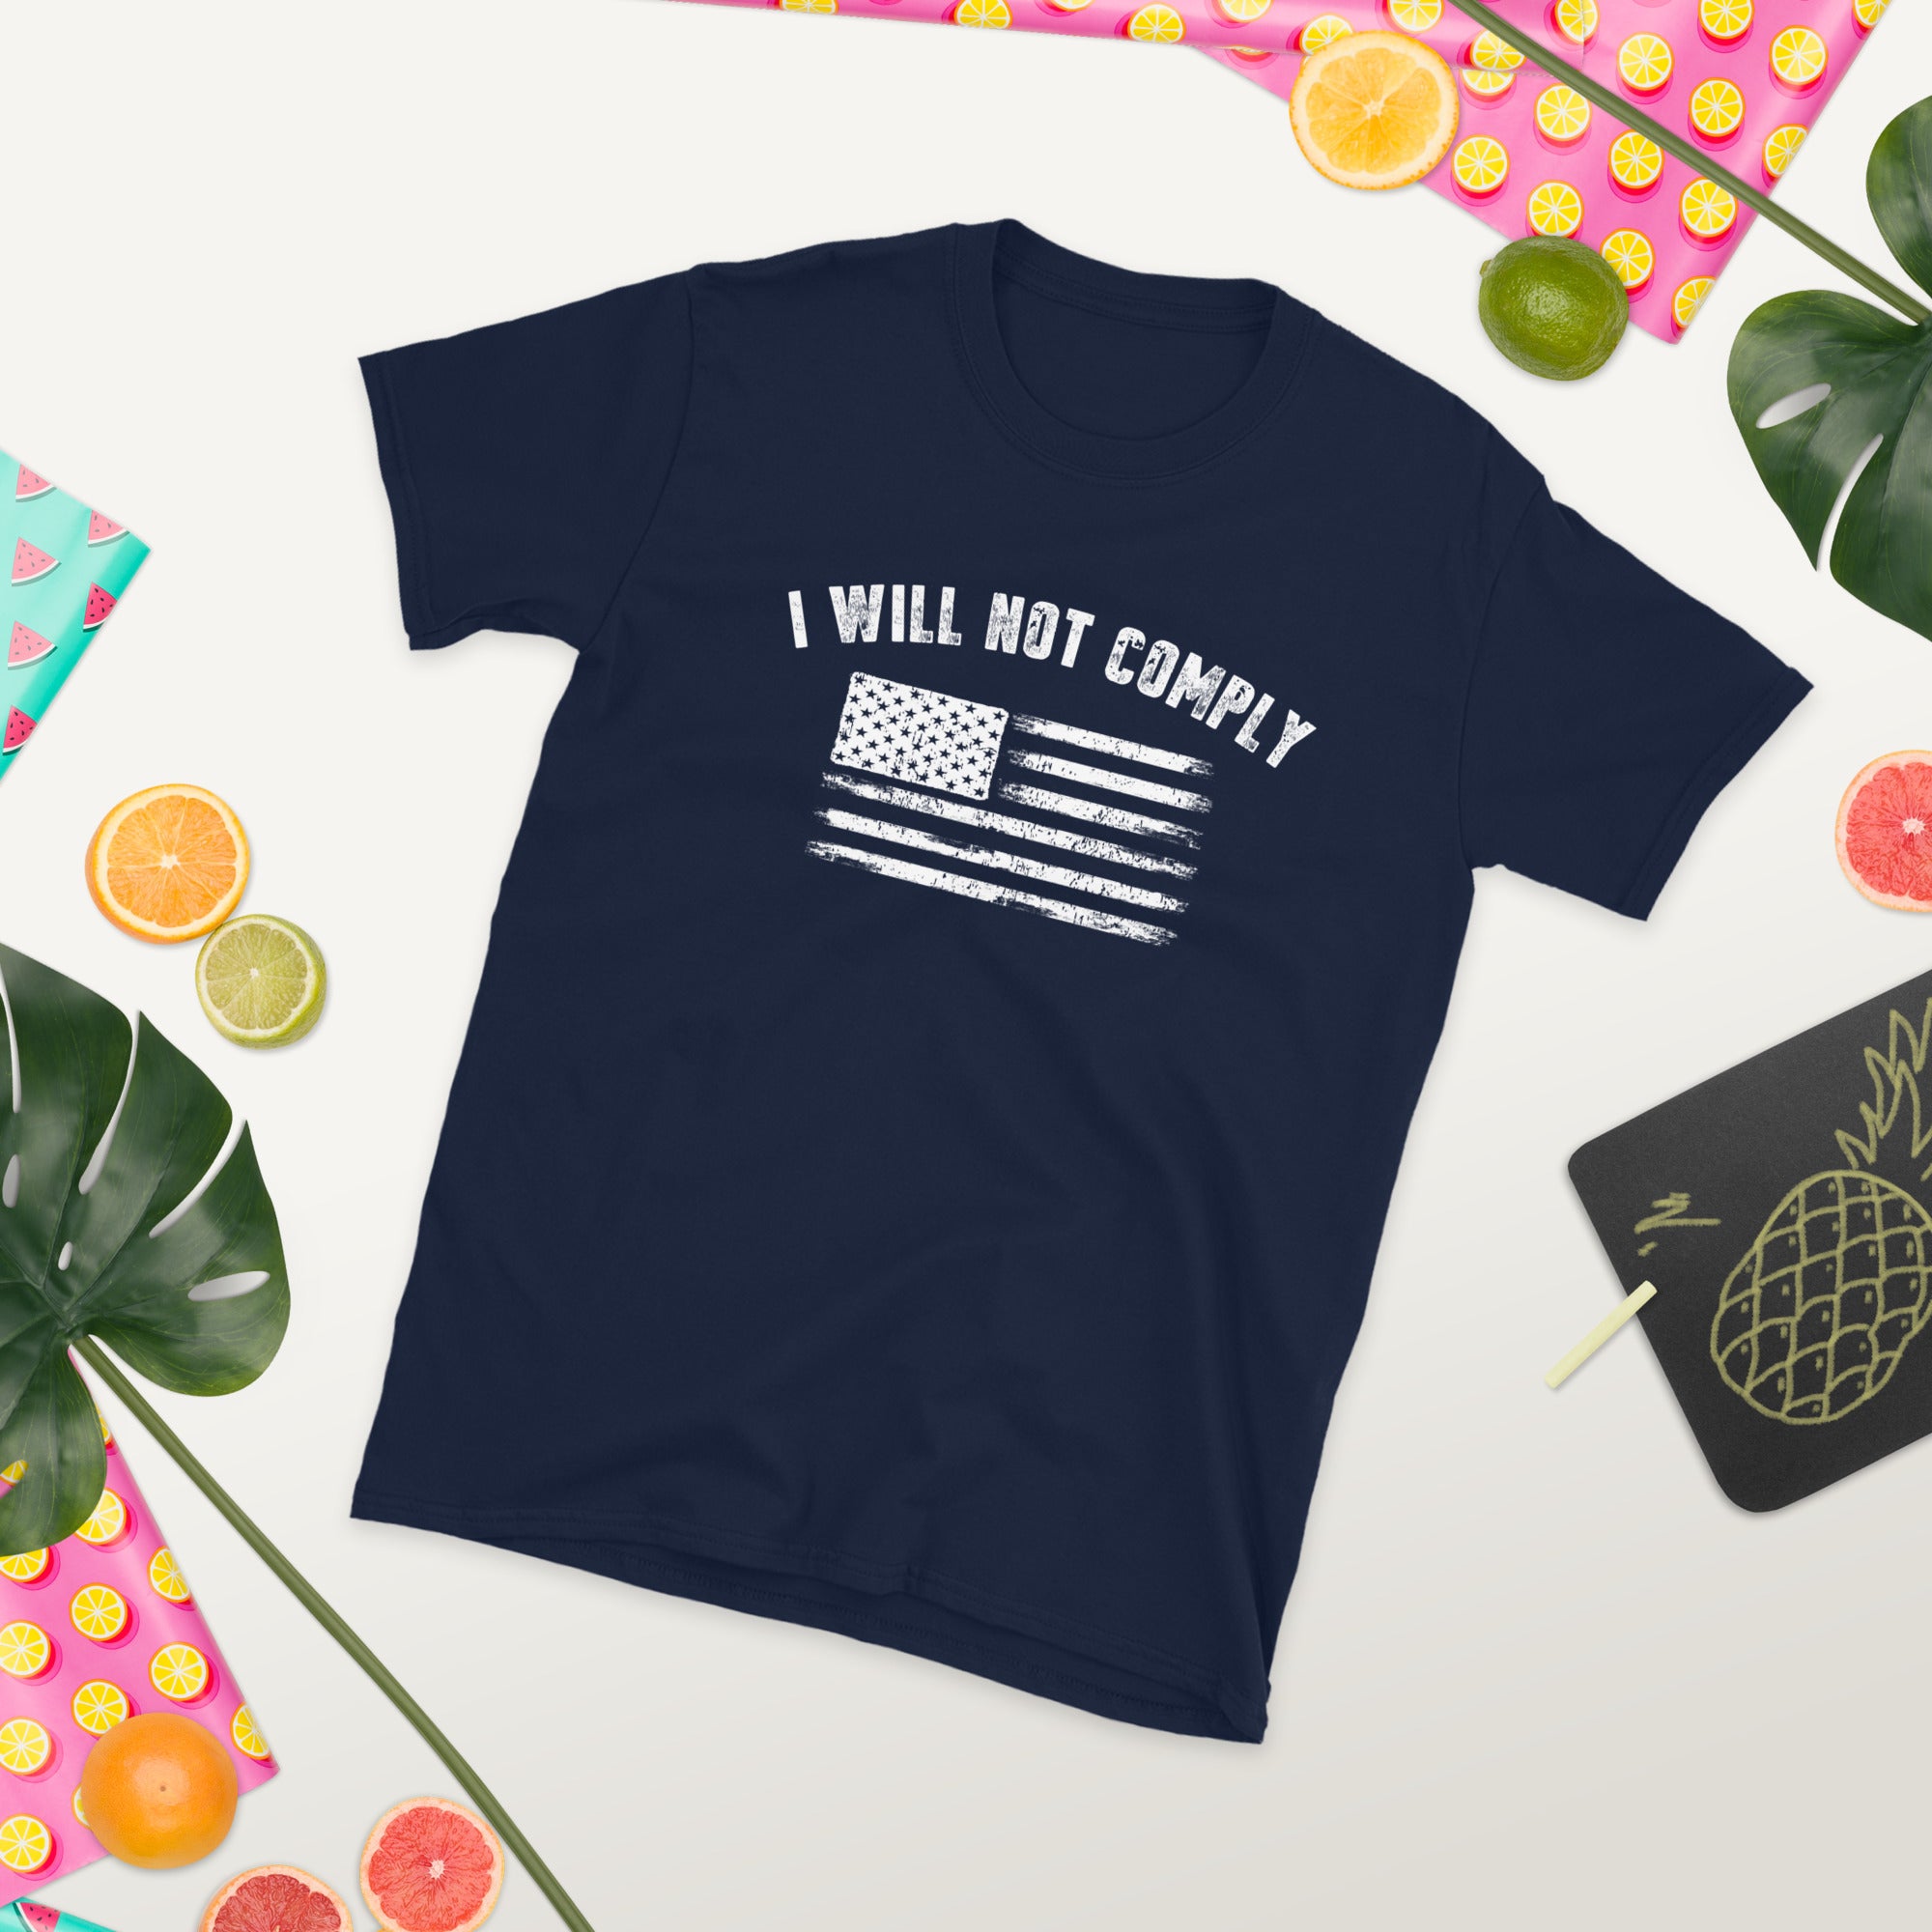 I Will Not Comply Shirt, Medical Freedom, Patriotic TShirt, Republican Shirt, Patriotic Gifts, USA American Flag, Protest Freedom Tee - Madeinsea©